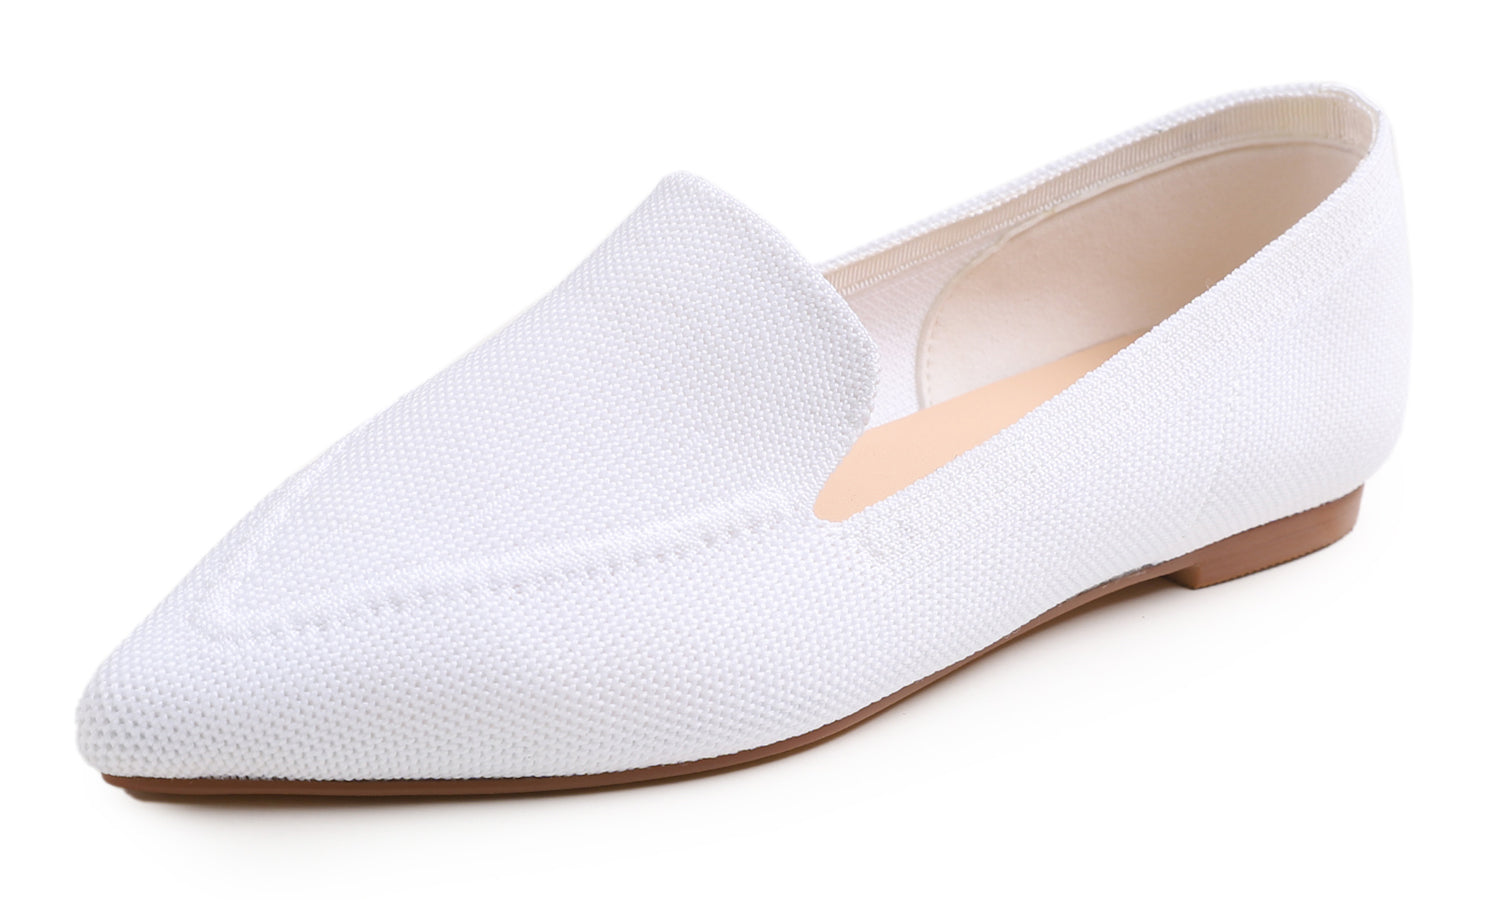 Feversole Women's Woven Fashion Breathable Knit Flat Shoes Pointed Loafer White